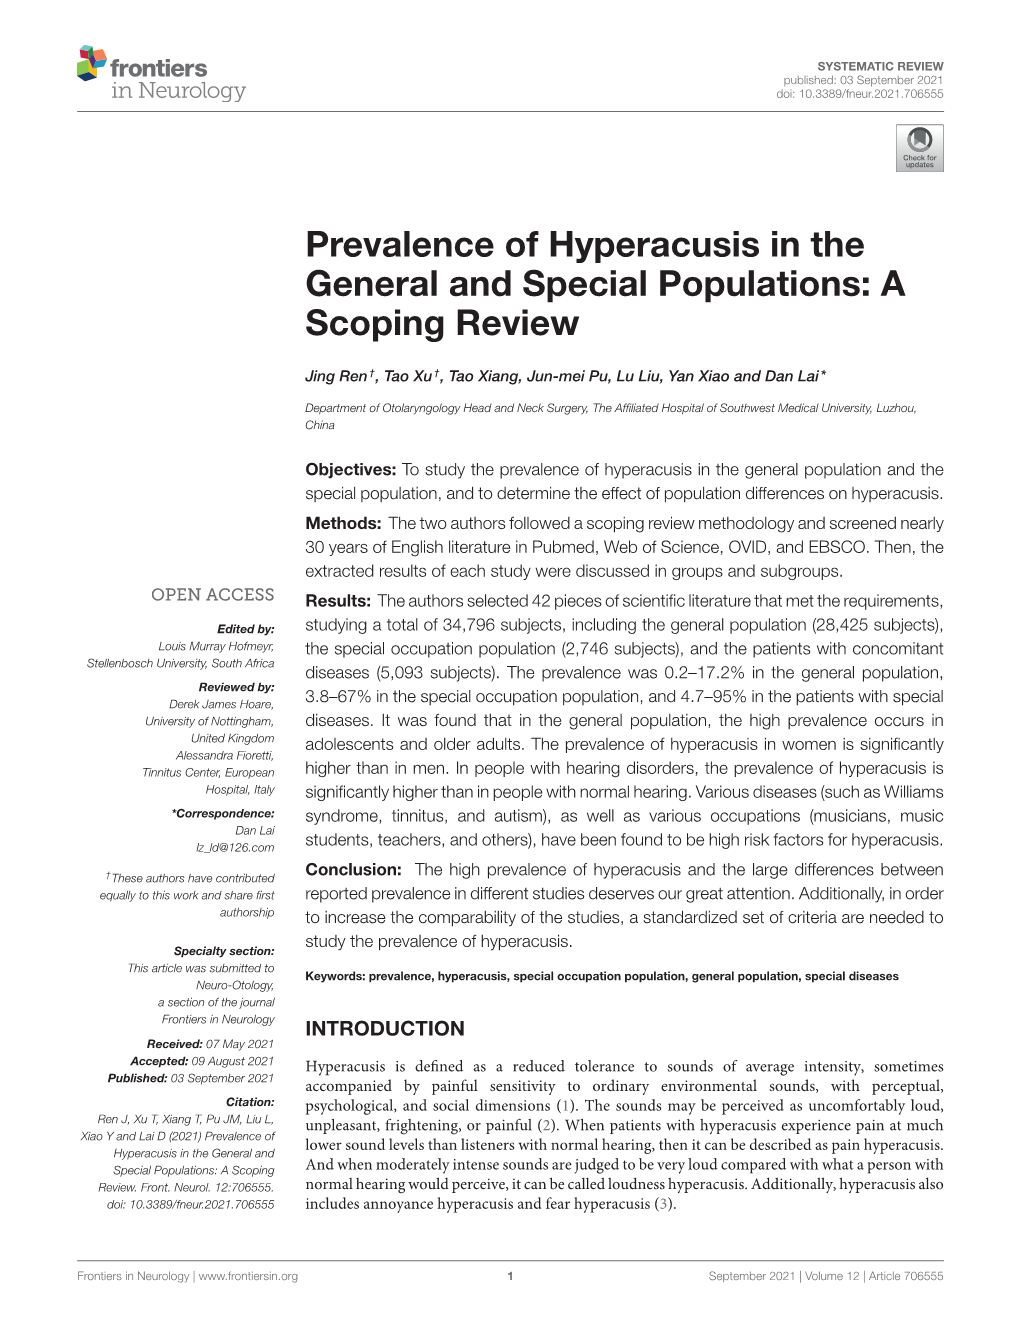 Prevalence of Hyperacusis in the General and Special Populations: a Scoping Review